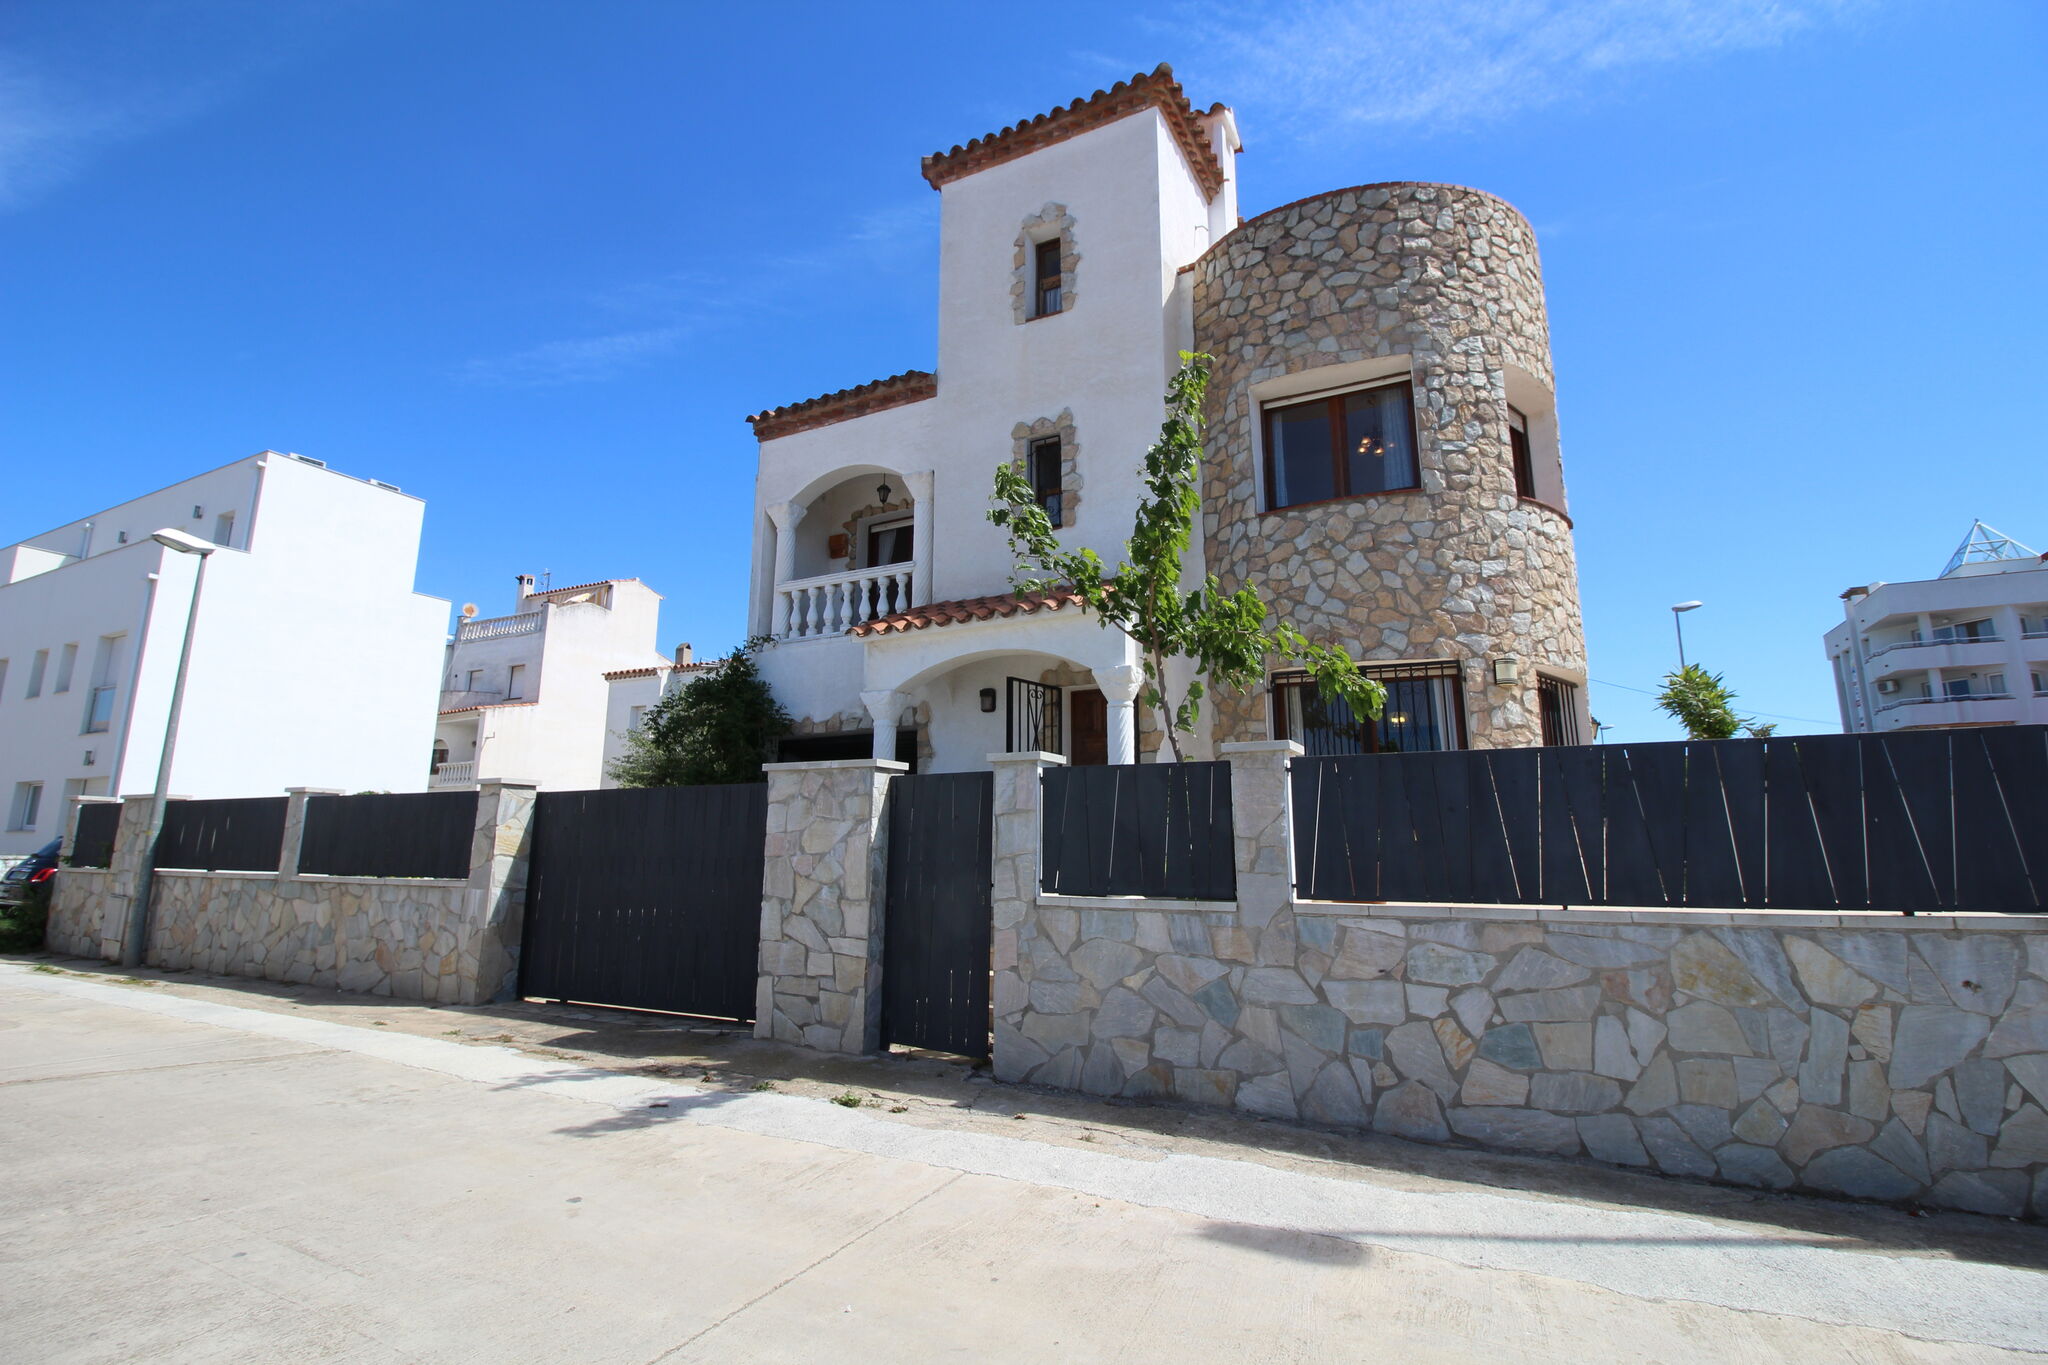 Holiday home in Empuriabrava with a private swimming pool